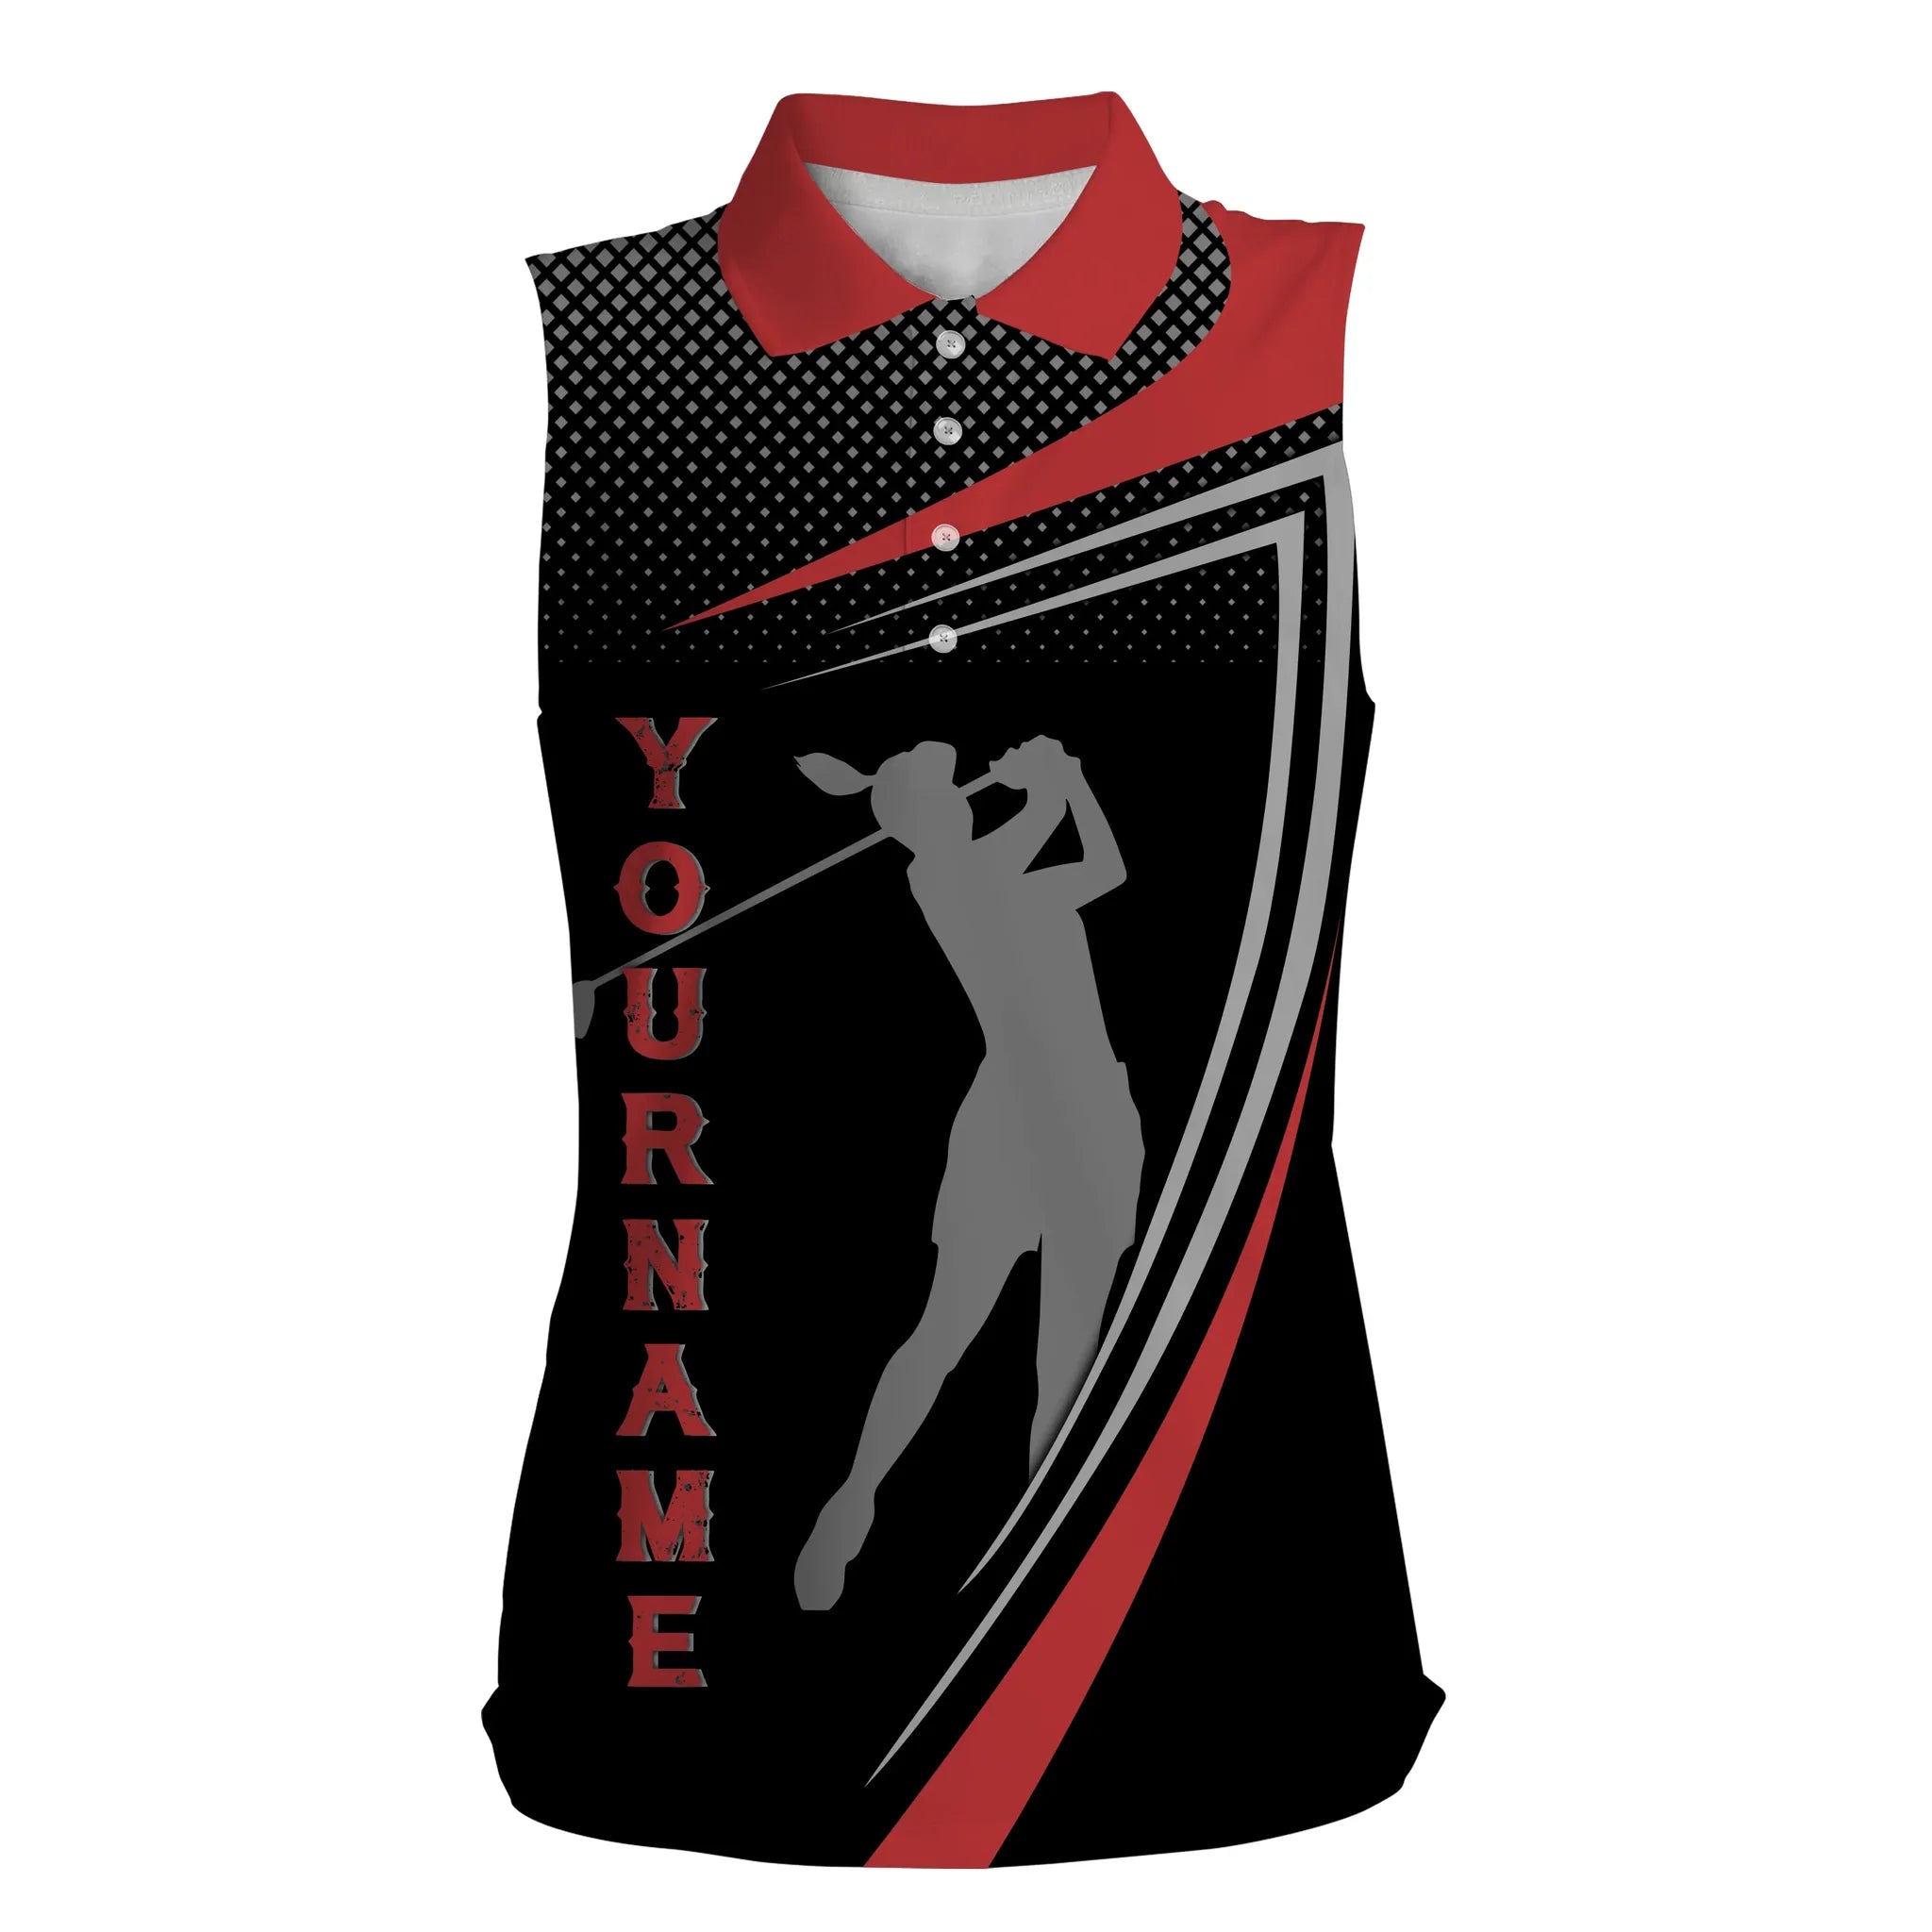 Personalized red and black sports golf custom sleeveless polo shirt/ best golf shirt for women